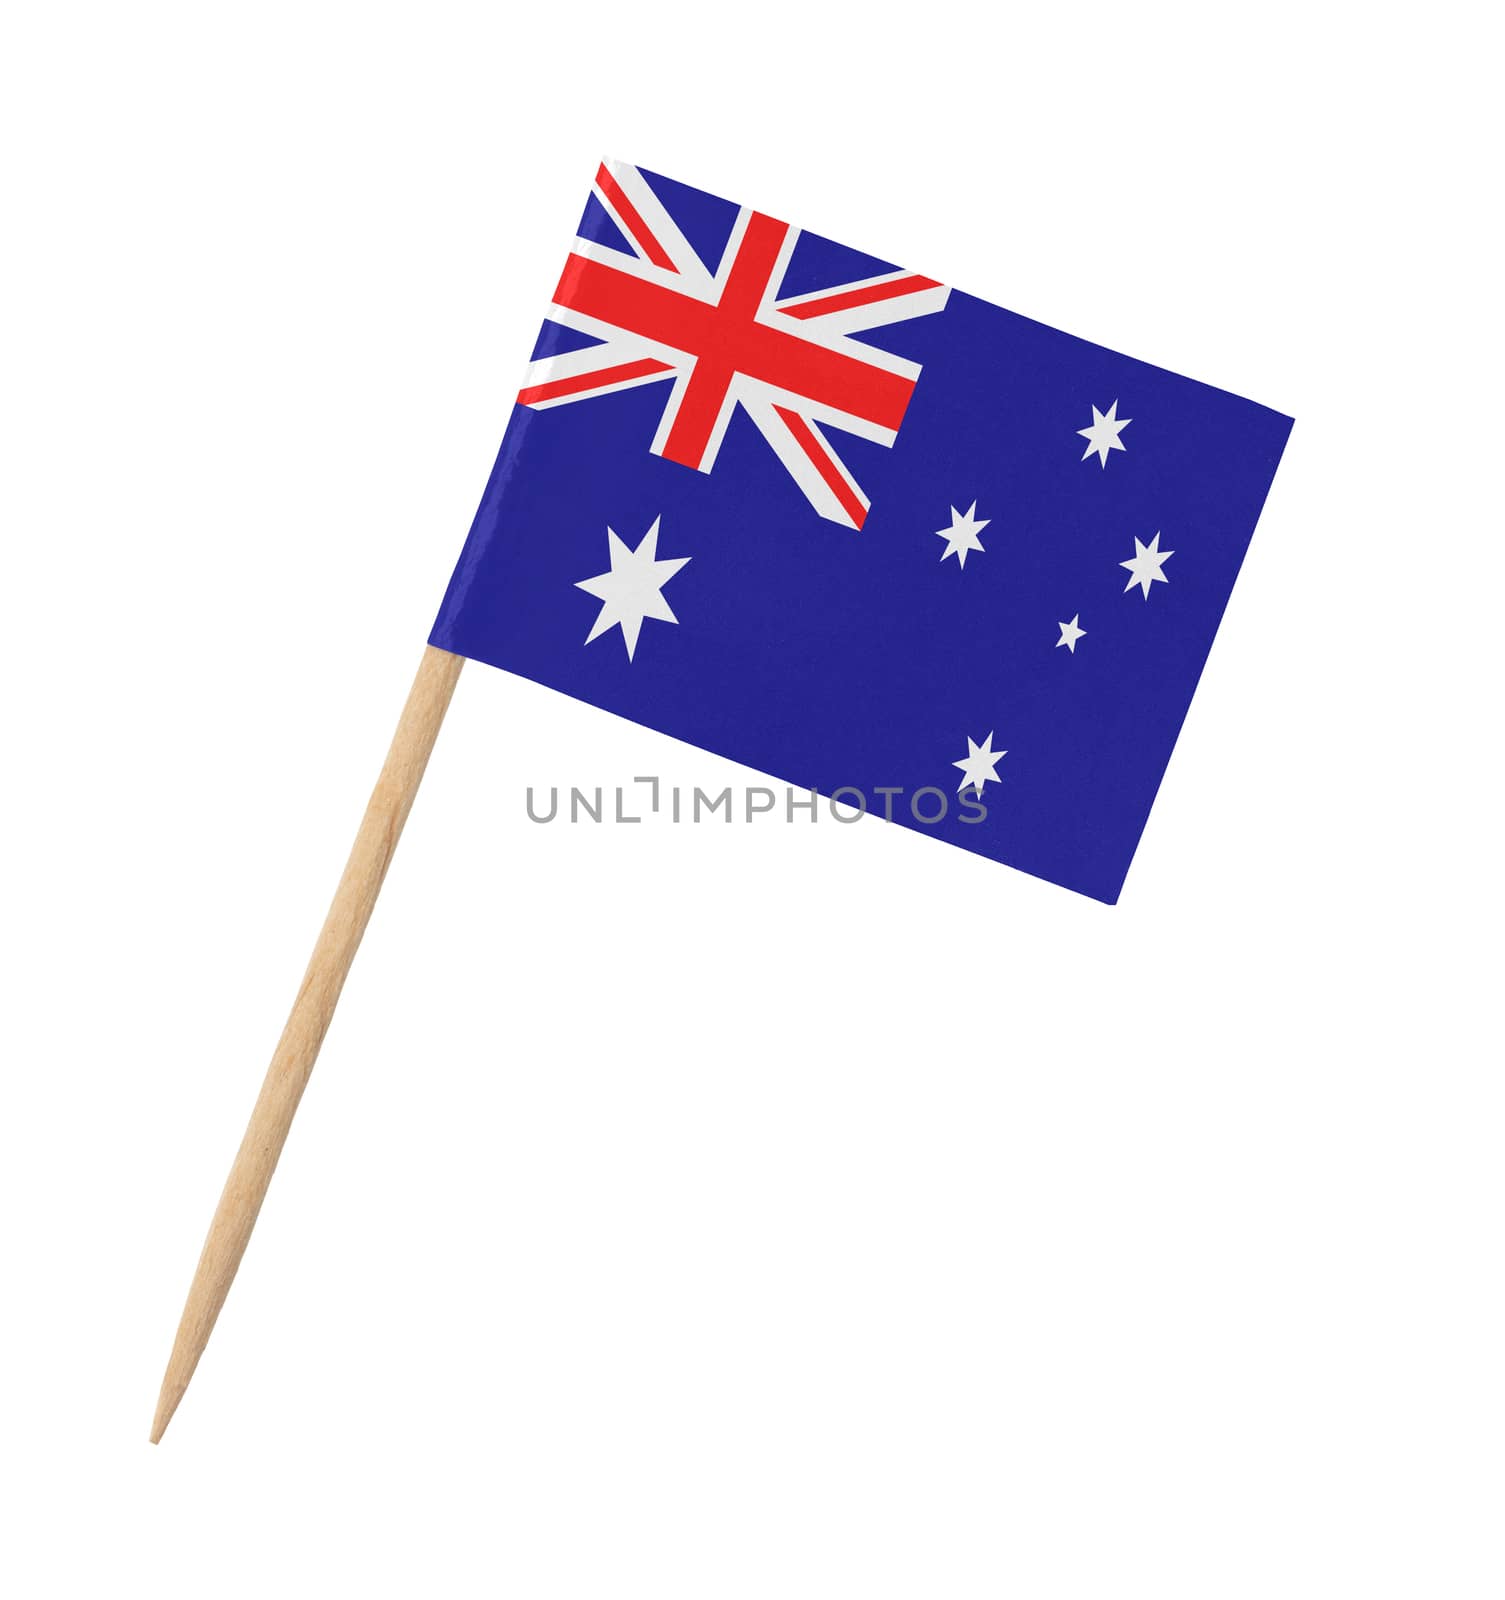 Small paper Australian flag on wooden stick by michaklootwijk